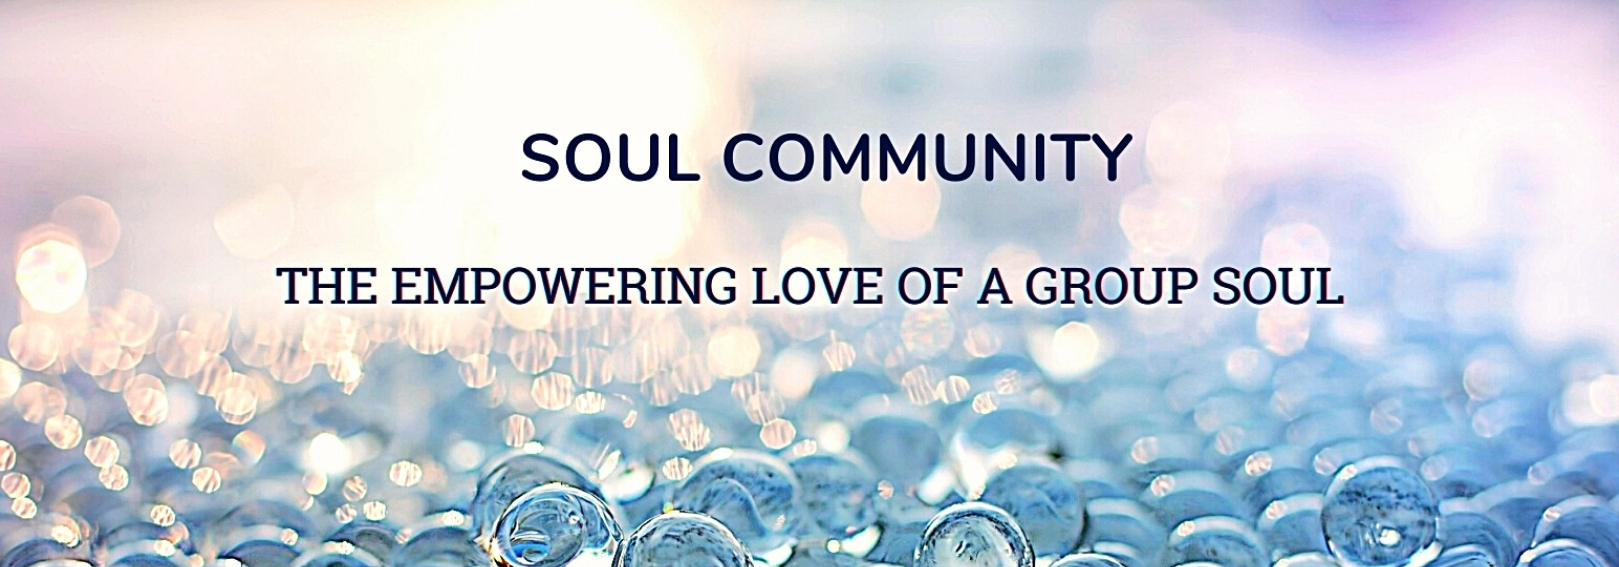 7.  Soul Community: Intro Goes Here